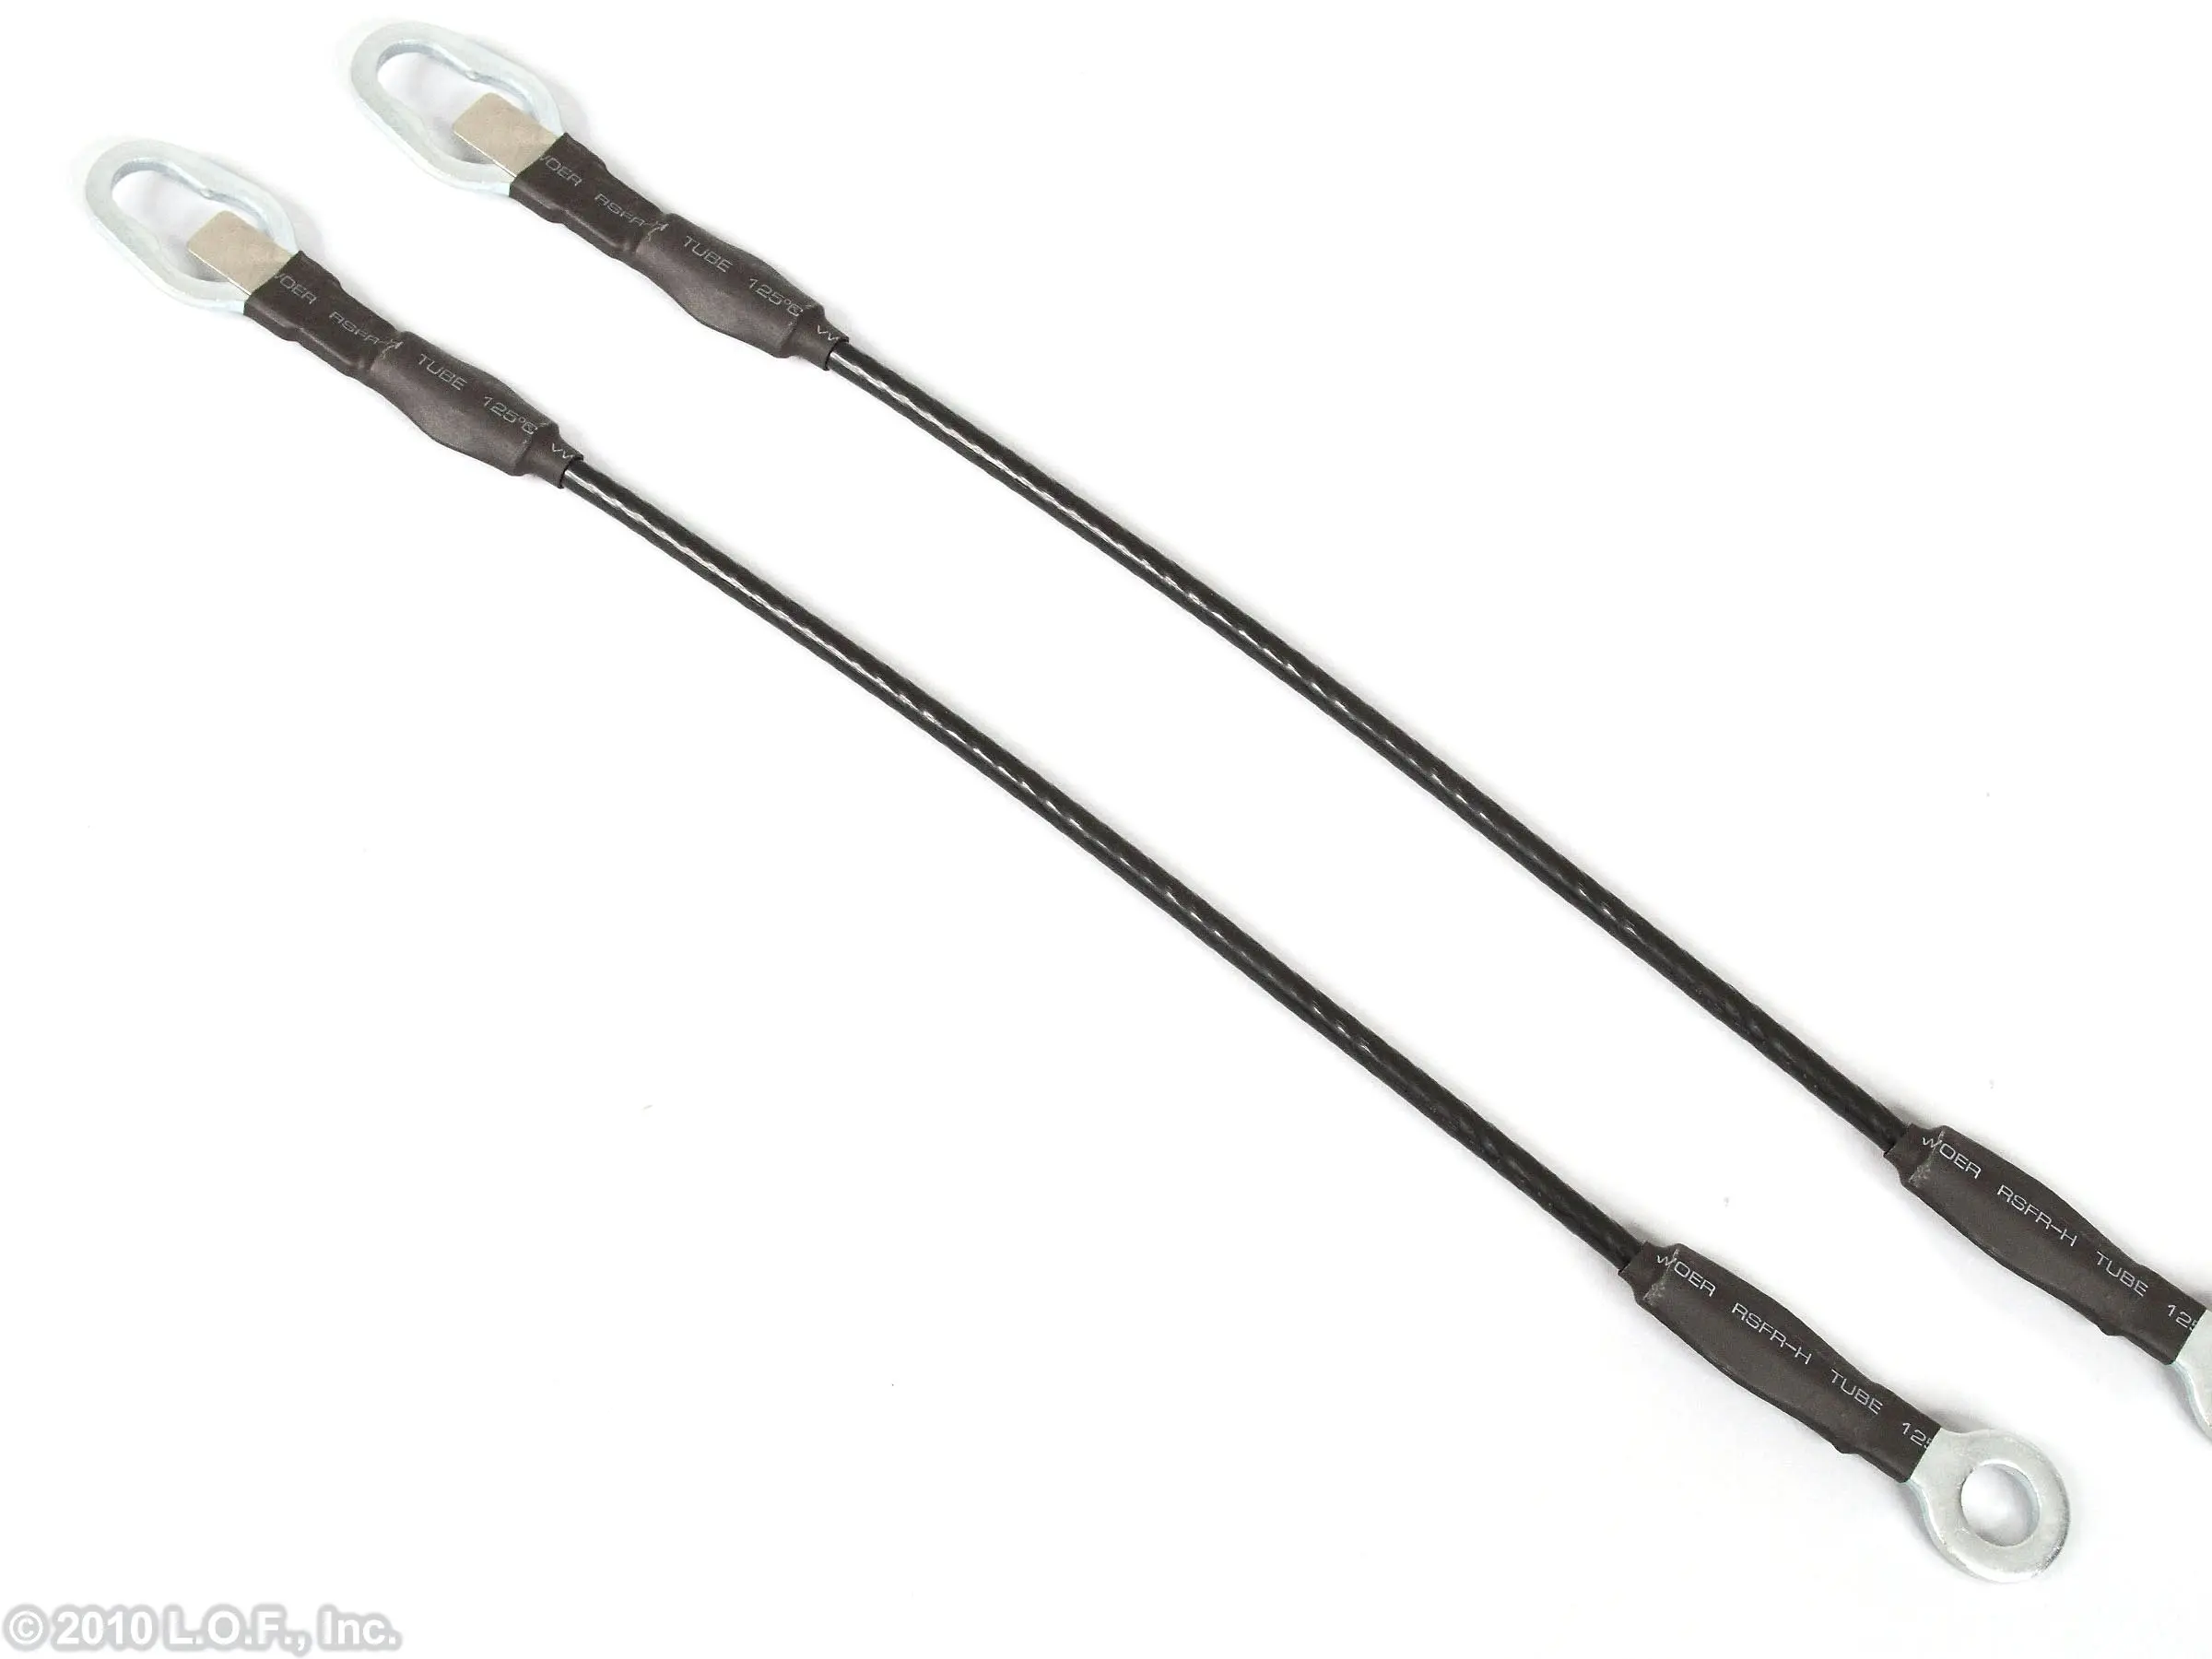 Set Tailgate Tail Gate Cables Pair For 1993-2011 Ford Ranger Mazda Pickup Truck